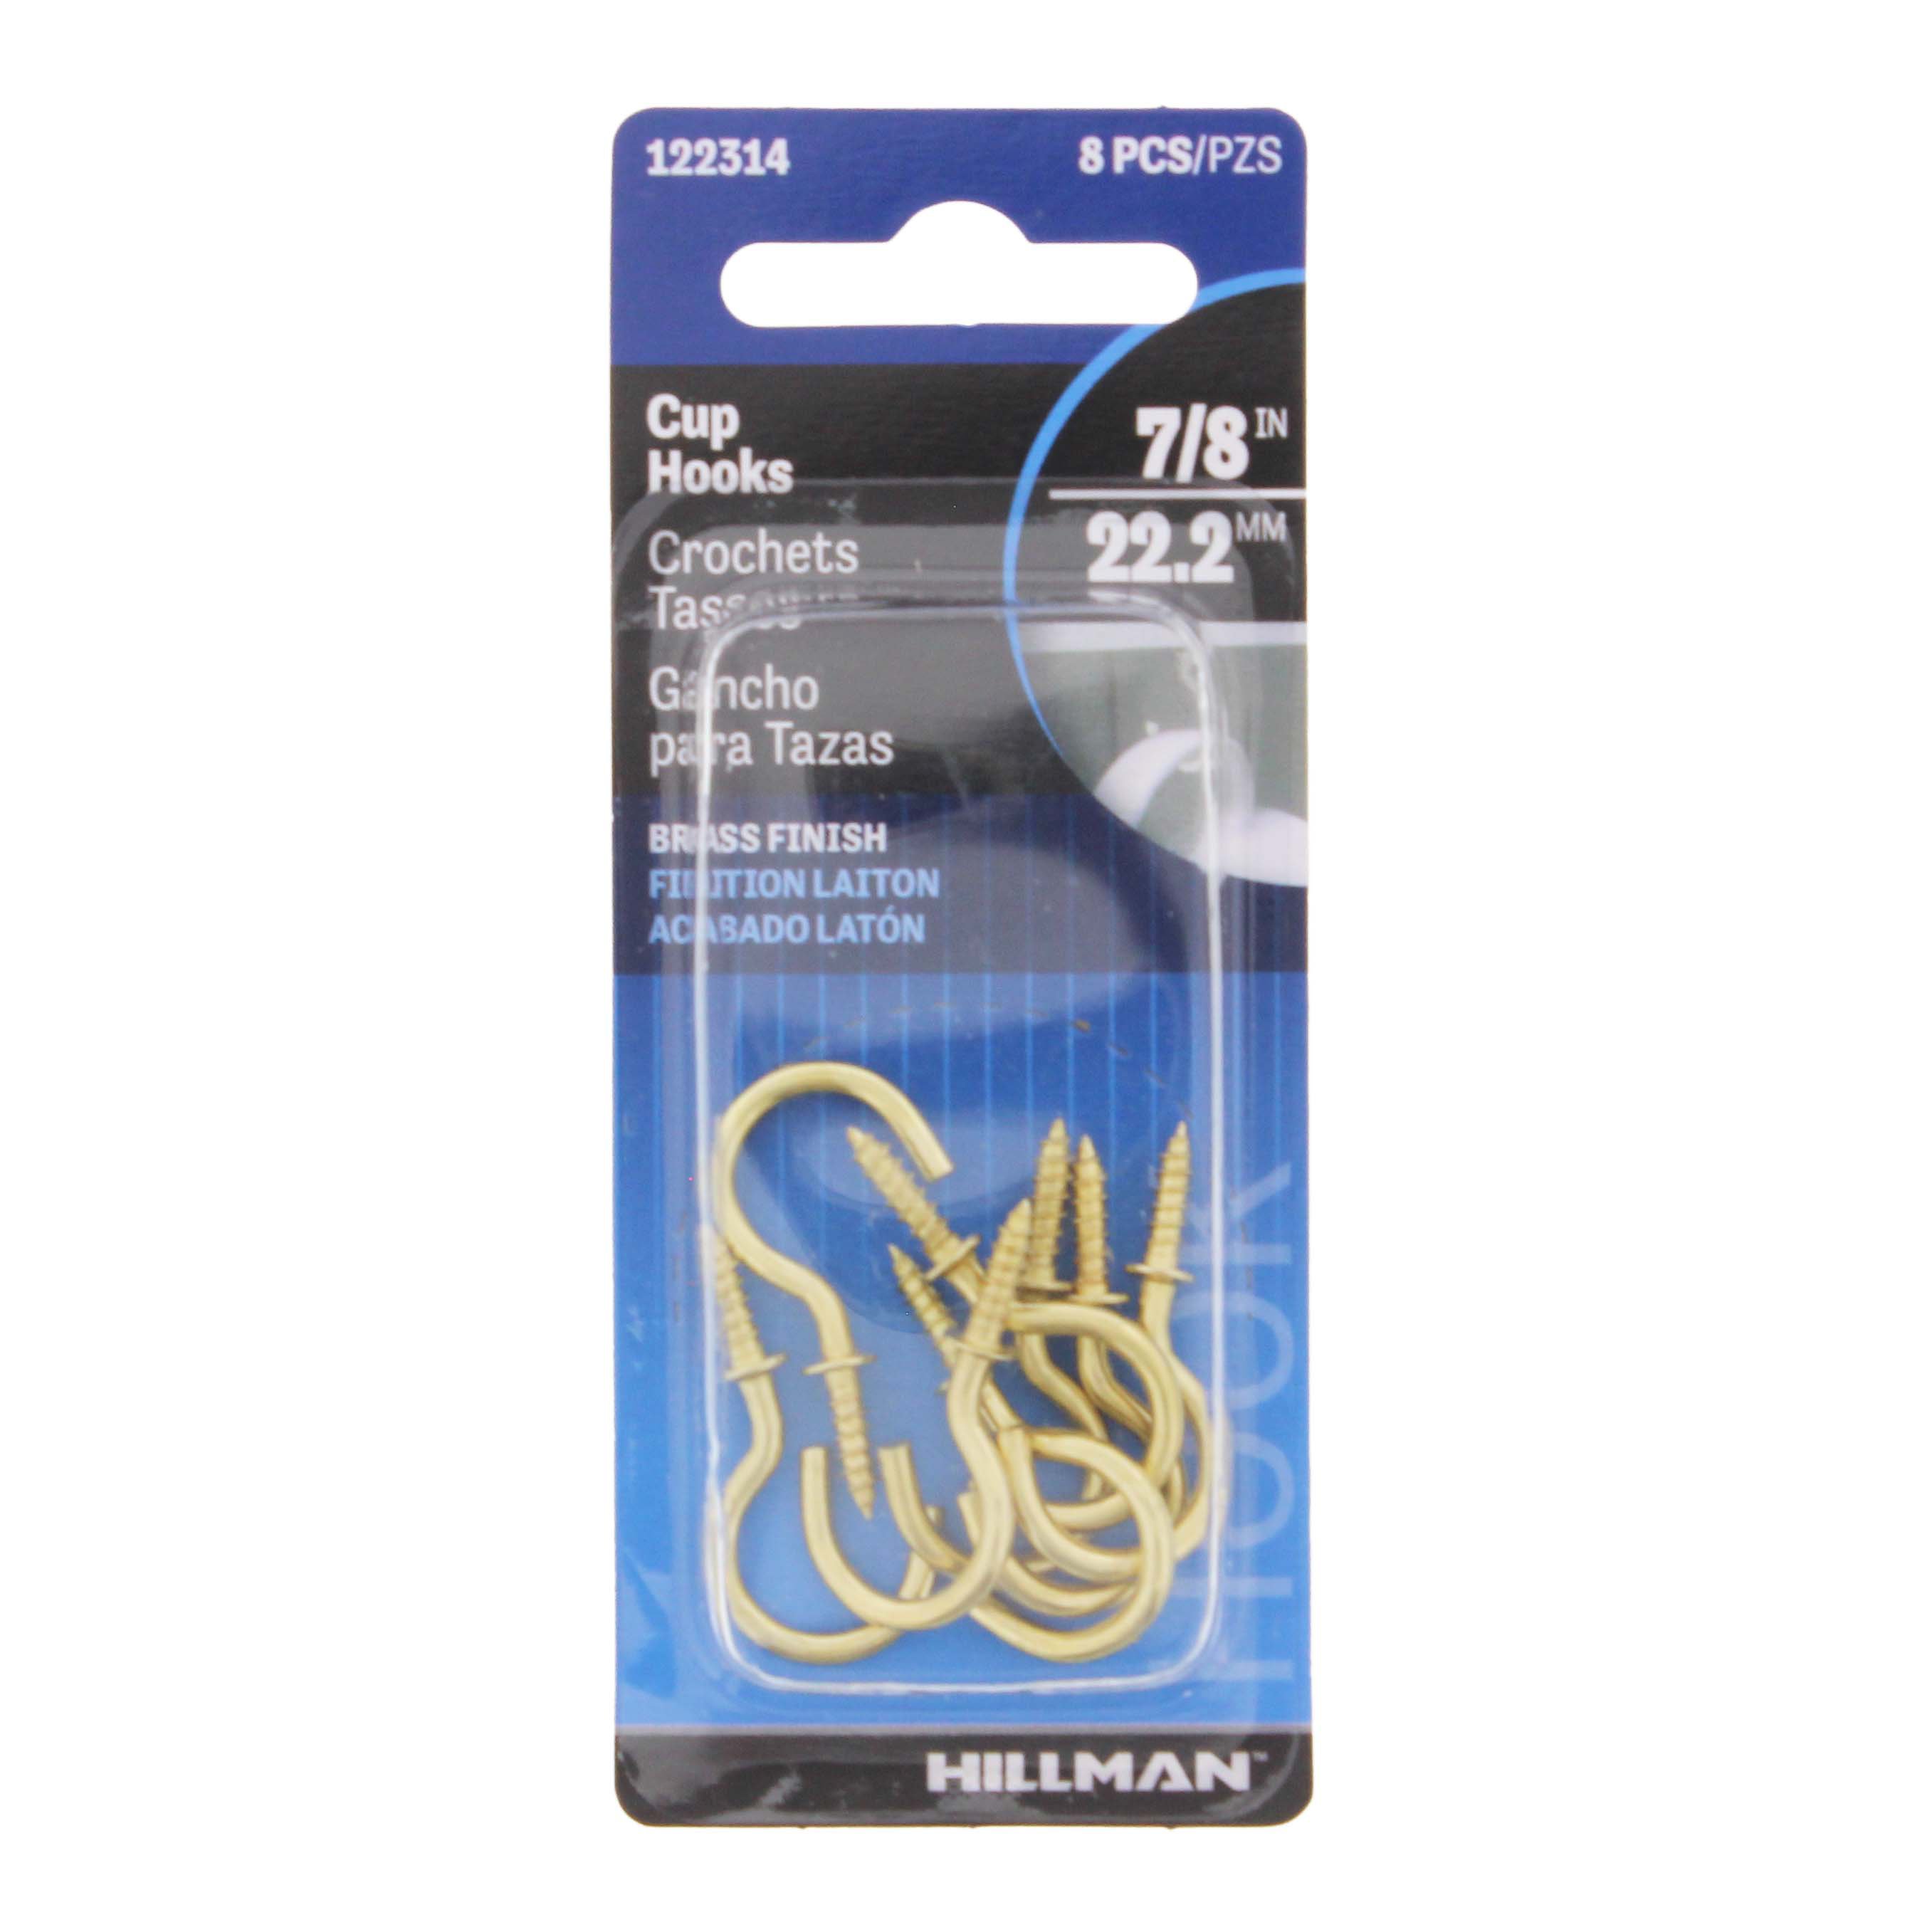 The Hillman Group Brass Cup Hooks - Shop Hooks & Picture Hangers at H-E-B